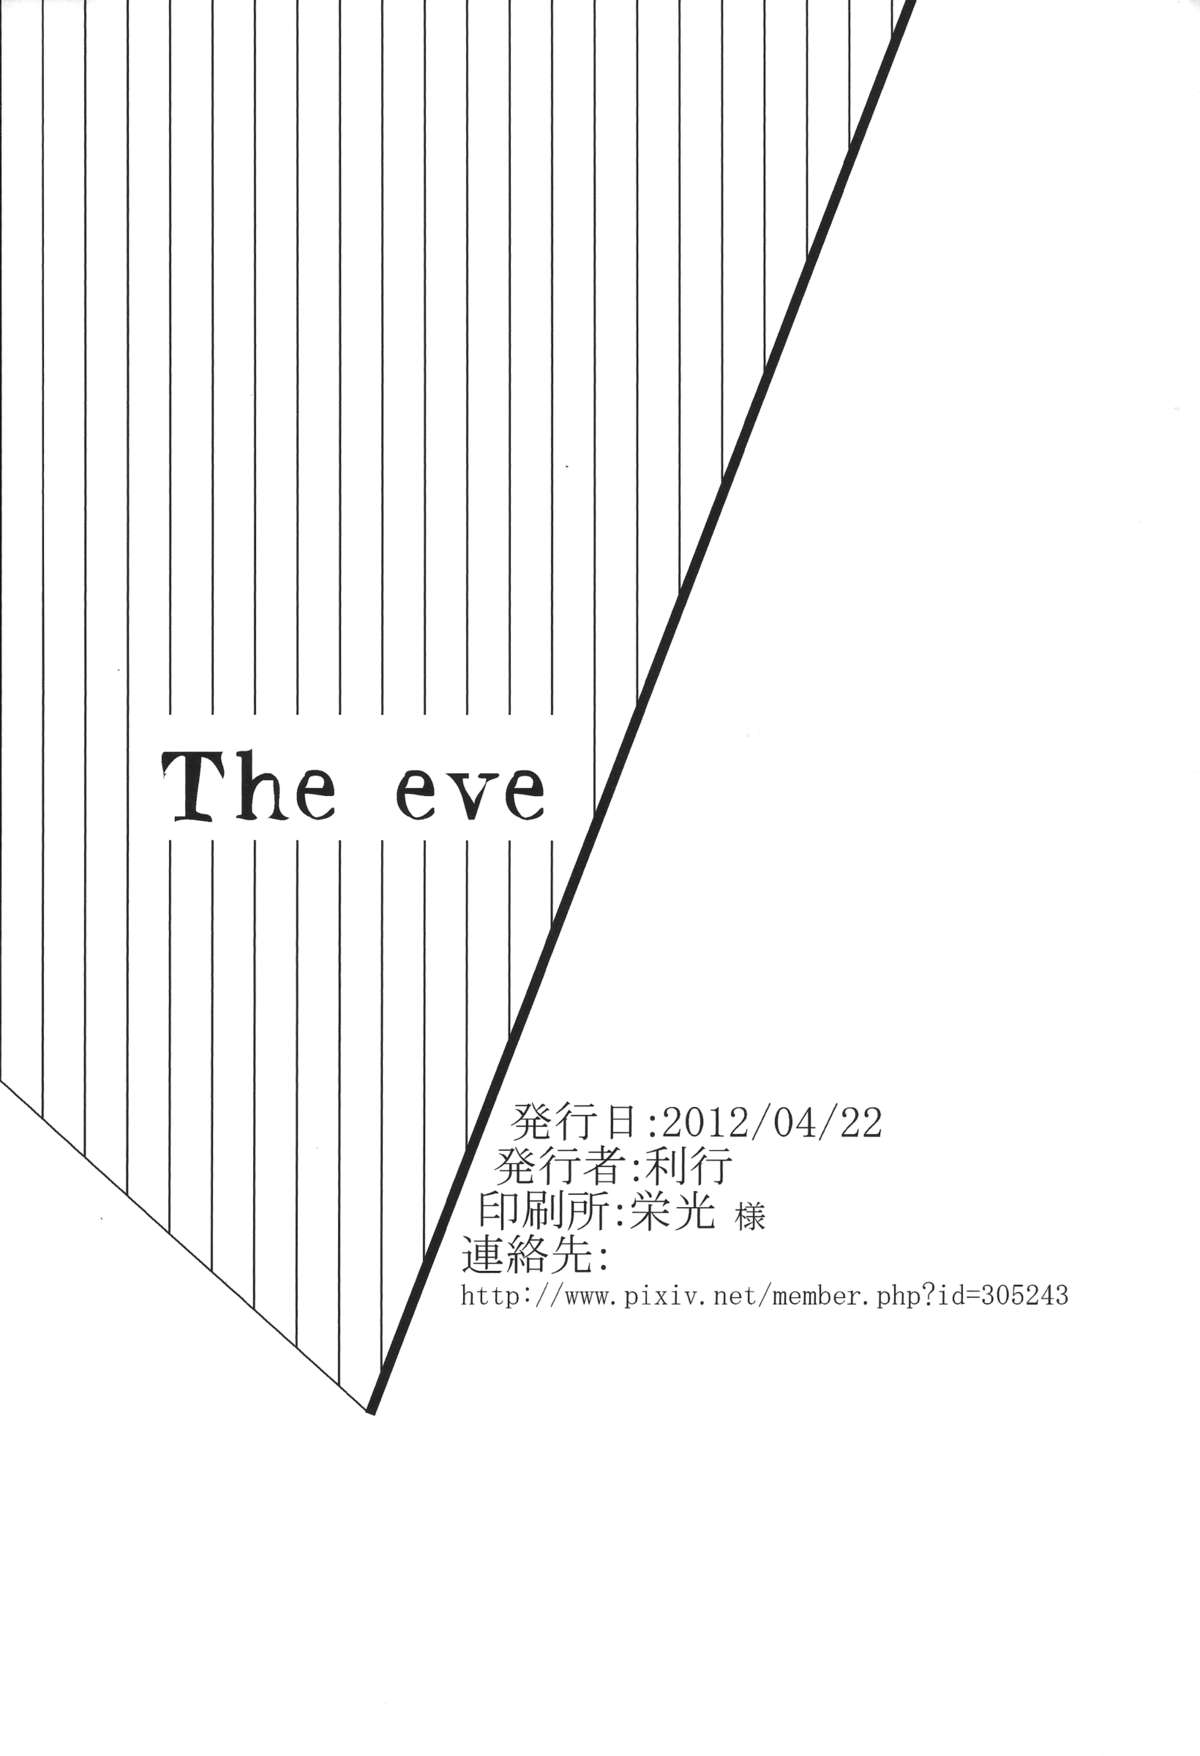 The eve - Foto 25